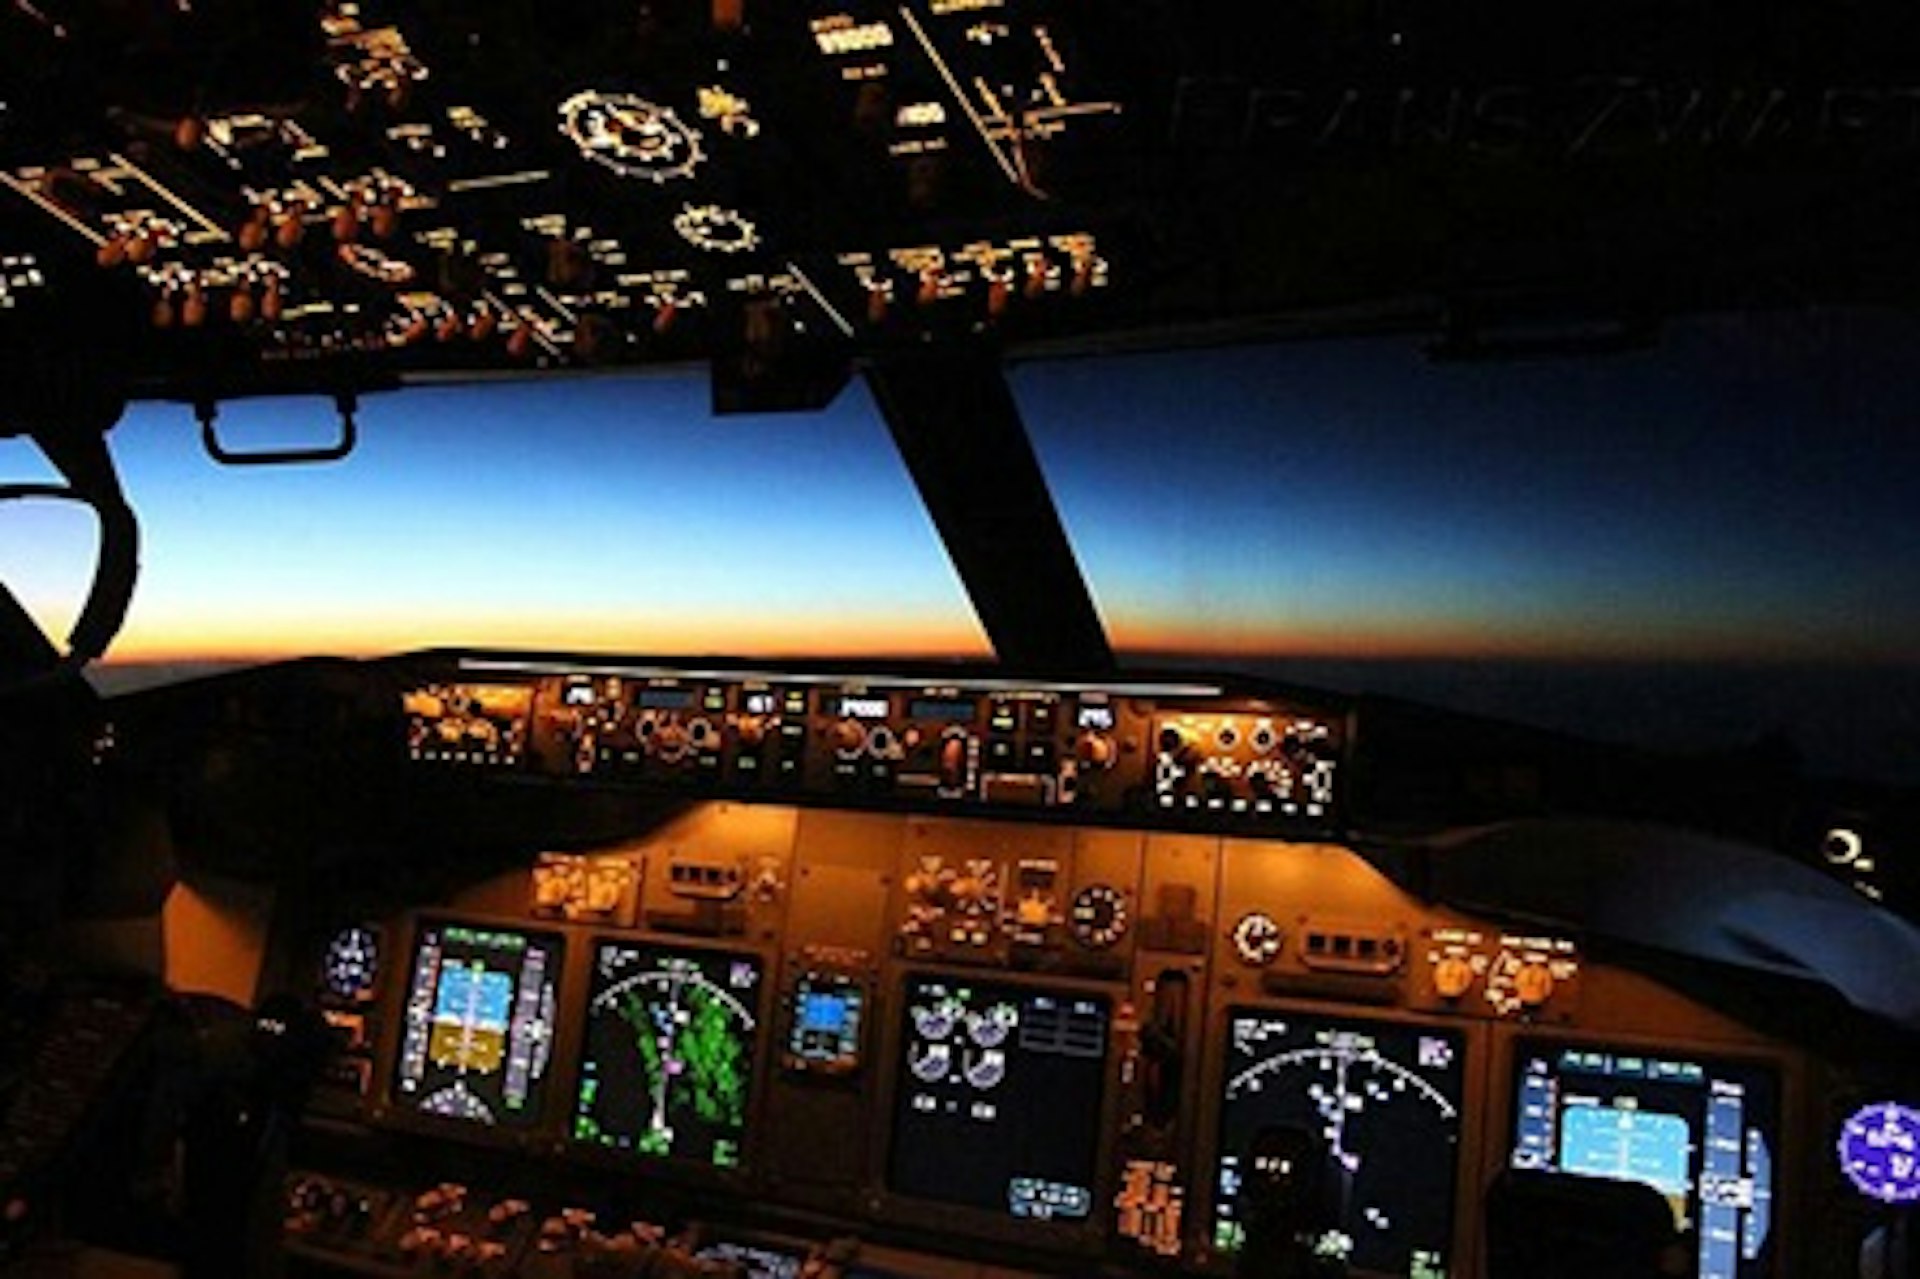 Flight Simulator Experience Aboard a Boeing 737 - 30 minutes 3